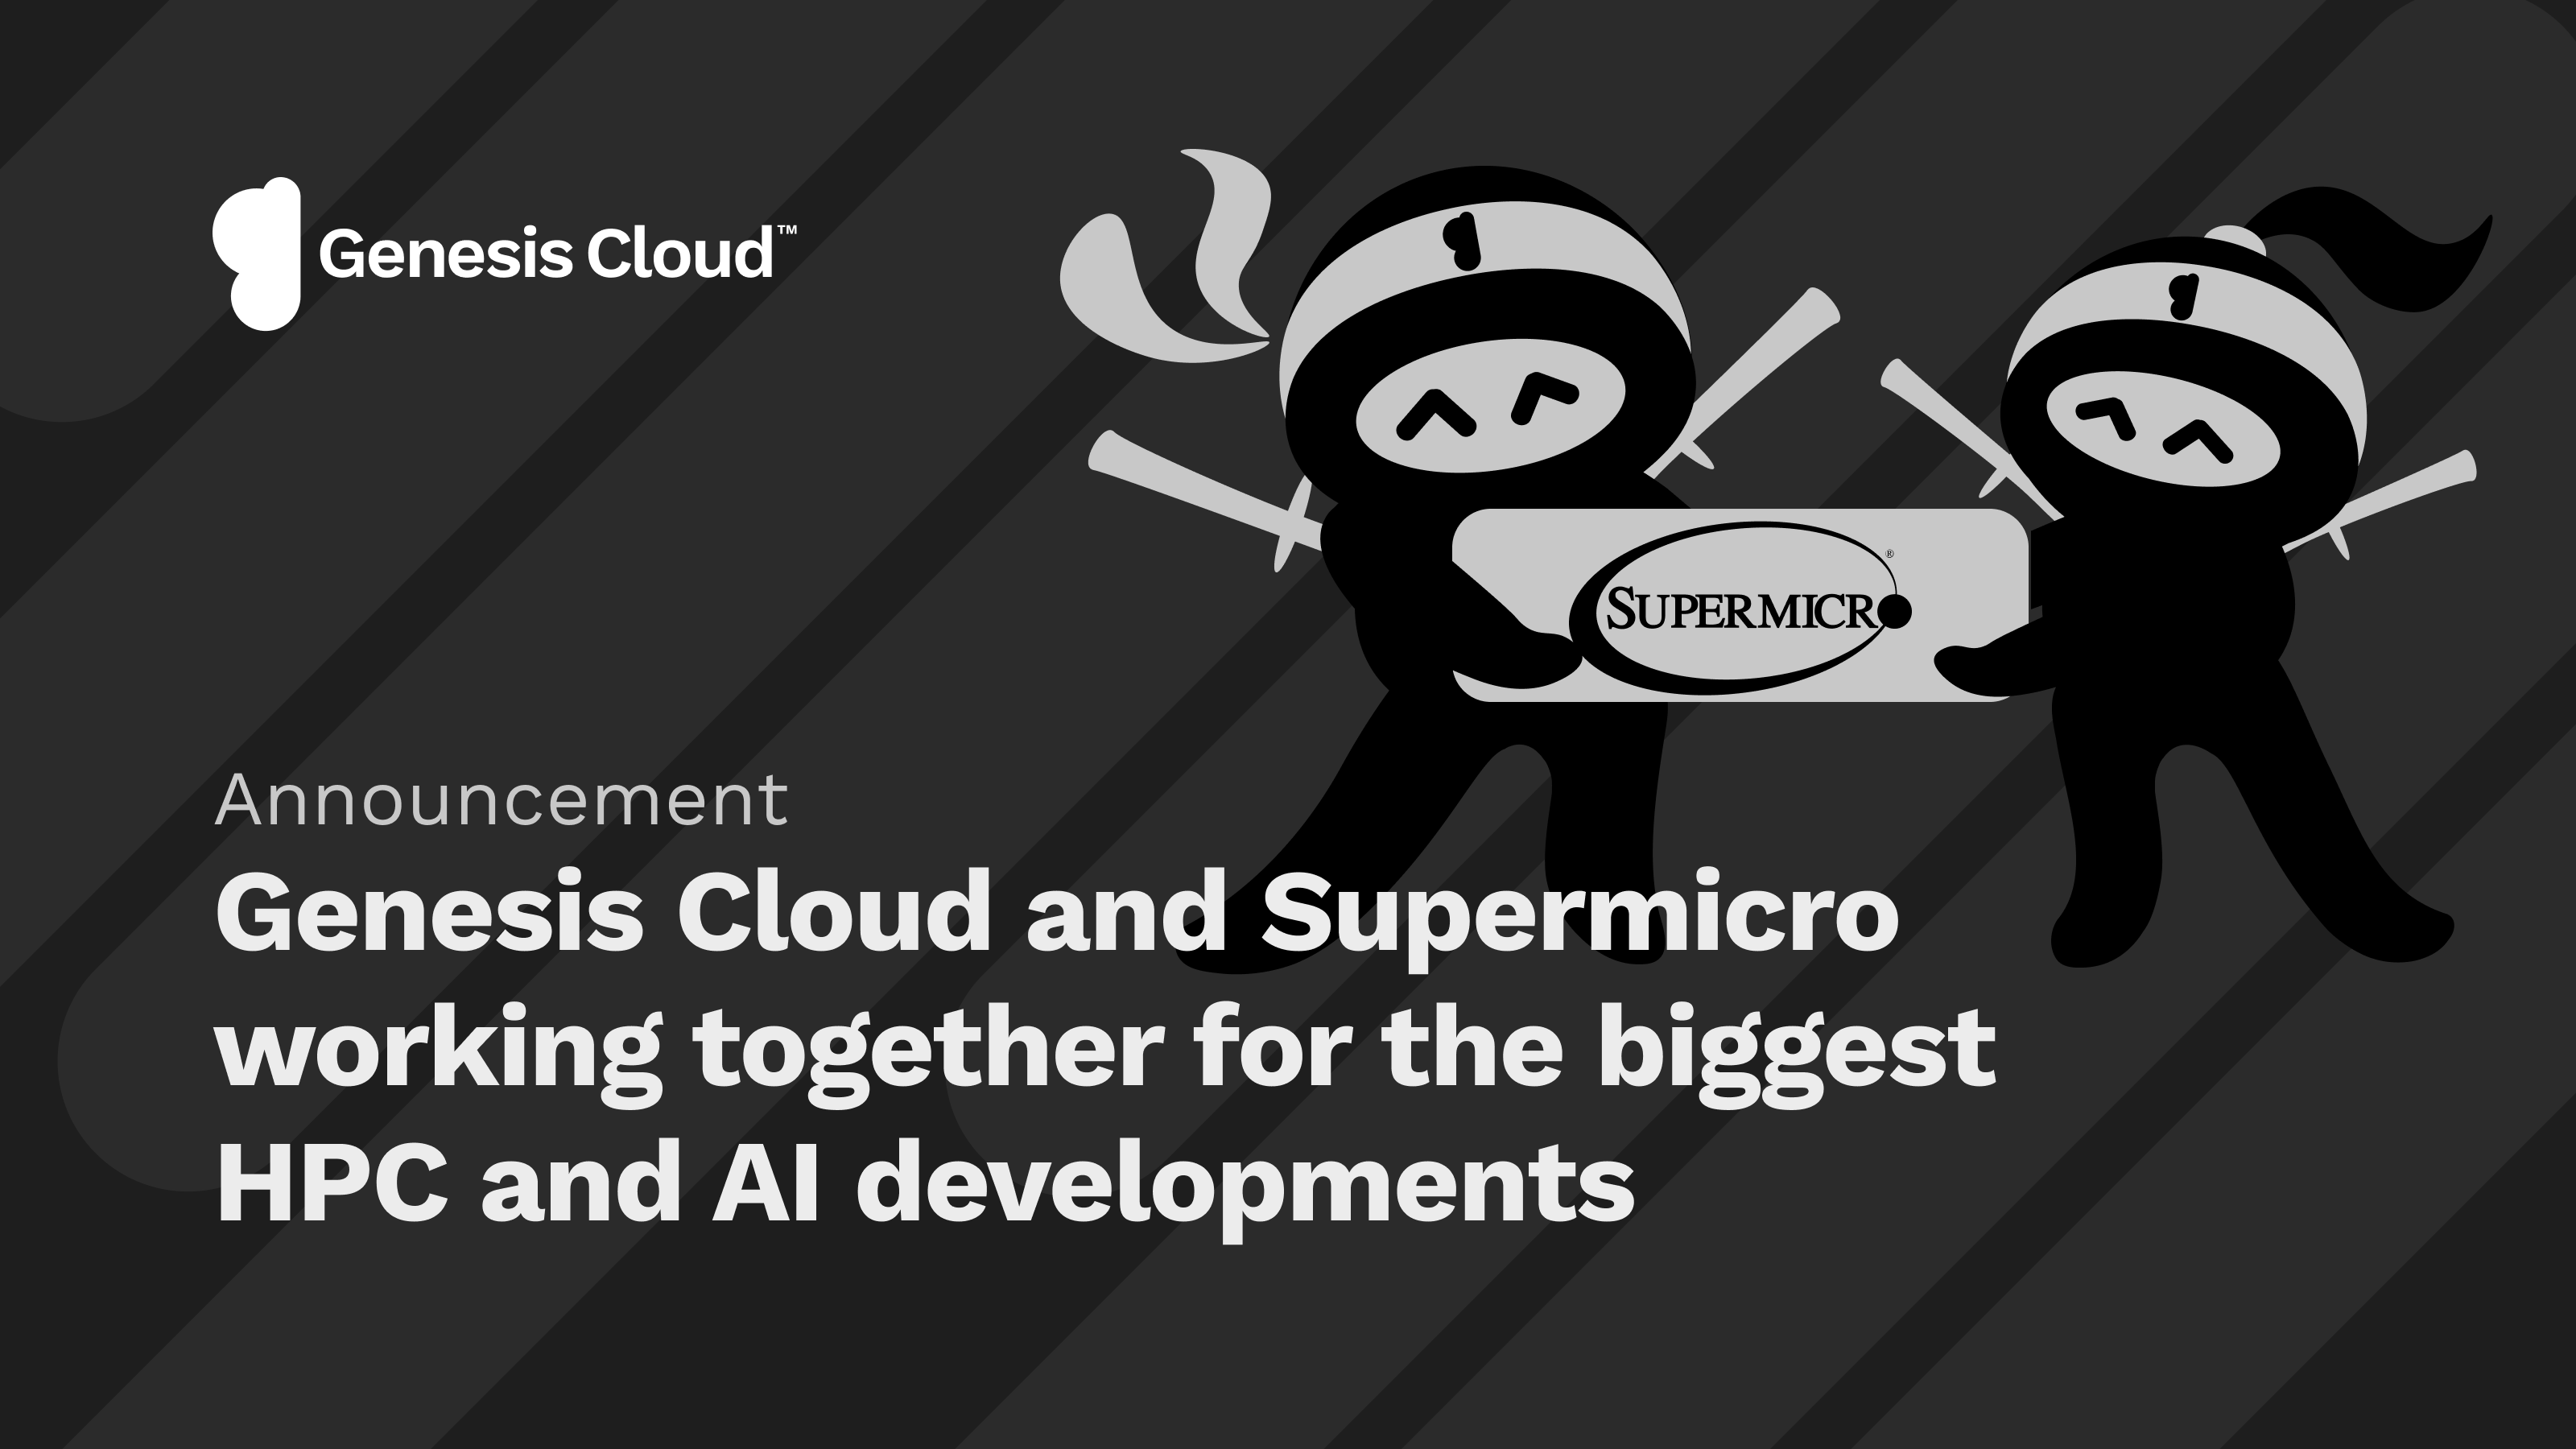 Genesis Cloud and Supermicro: Together for the biggest HPC and AI developments